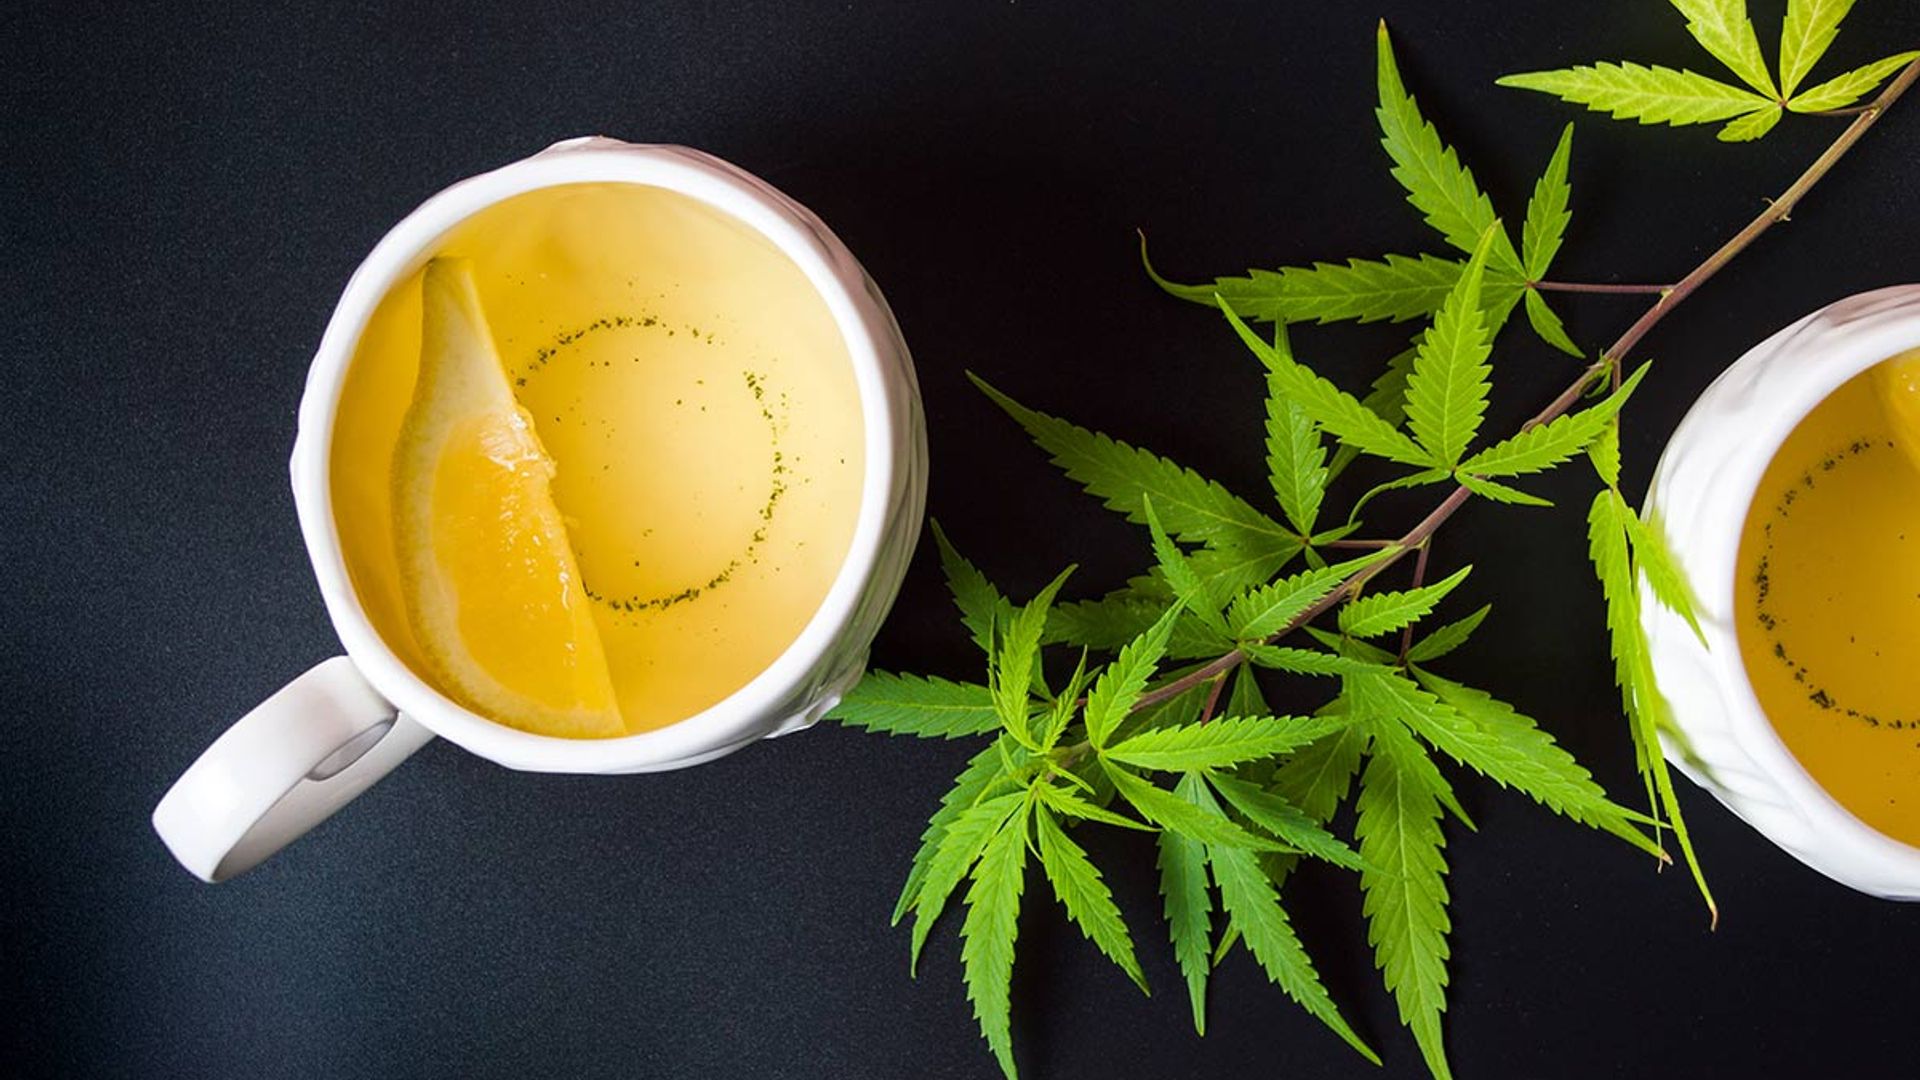 A rising trend for CBD-infused drinks sees the launch of a new tea with botanical hemp CBD extract